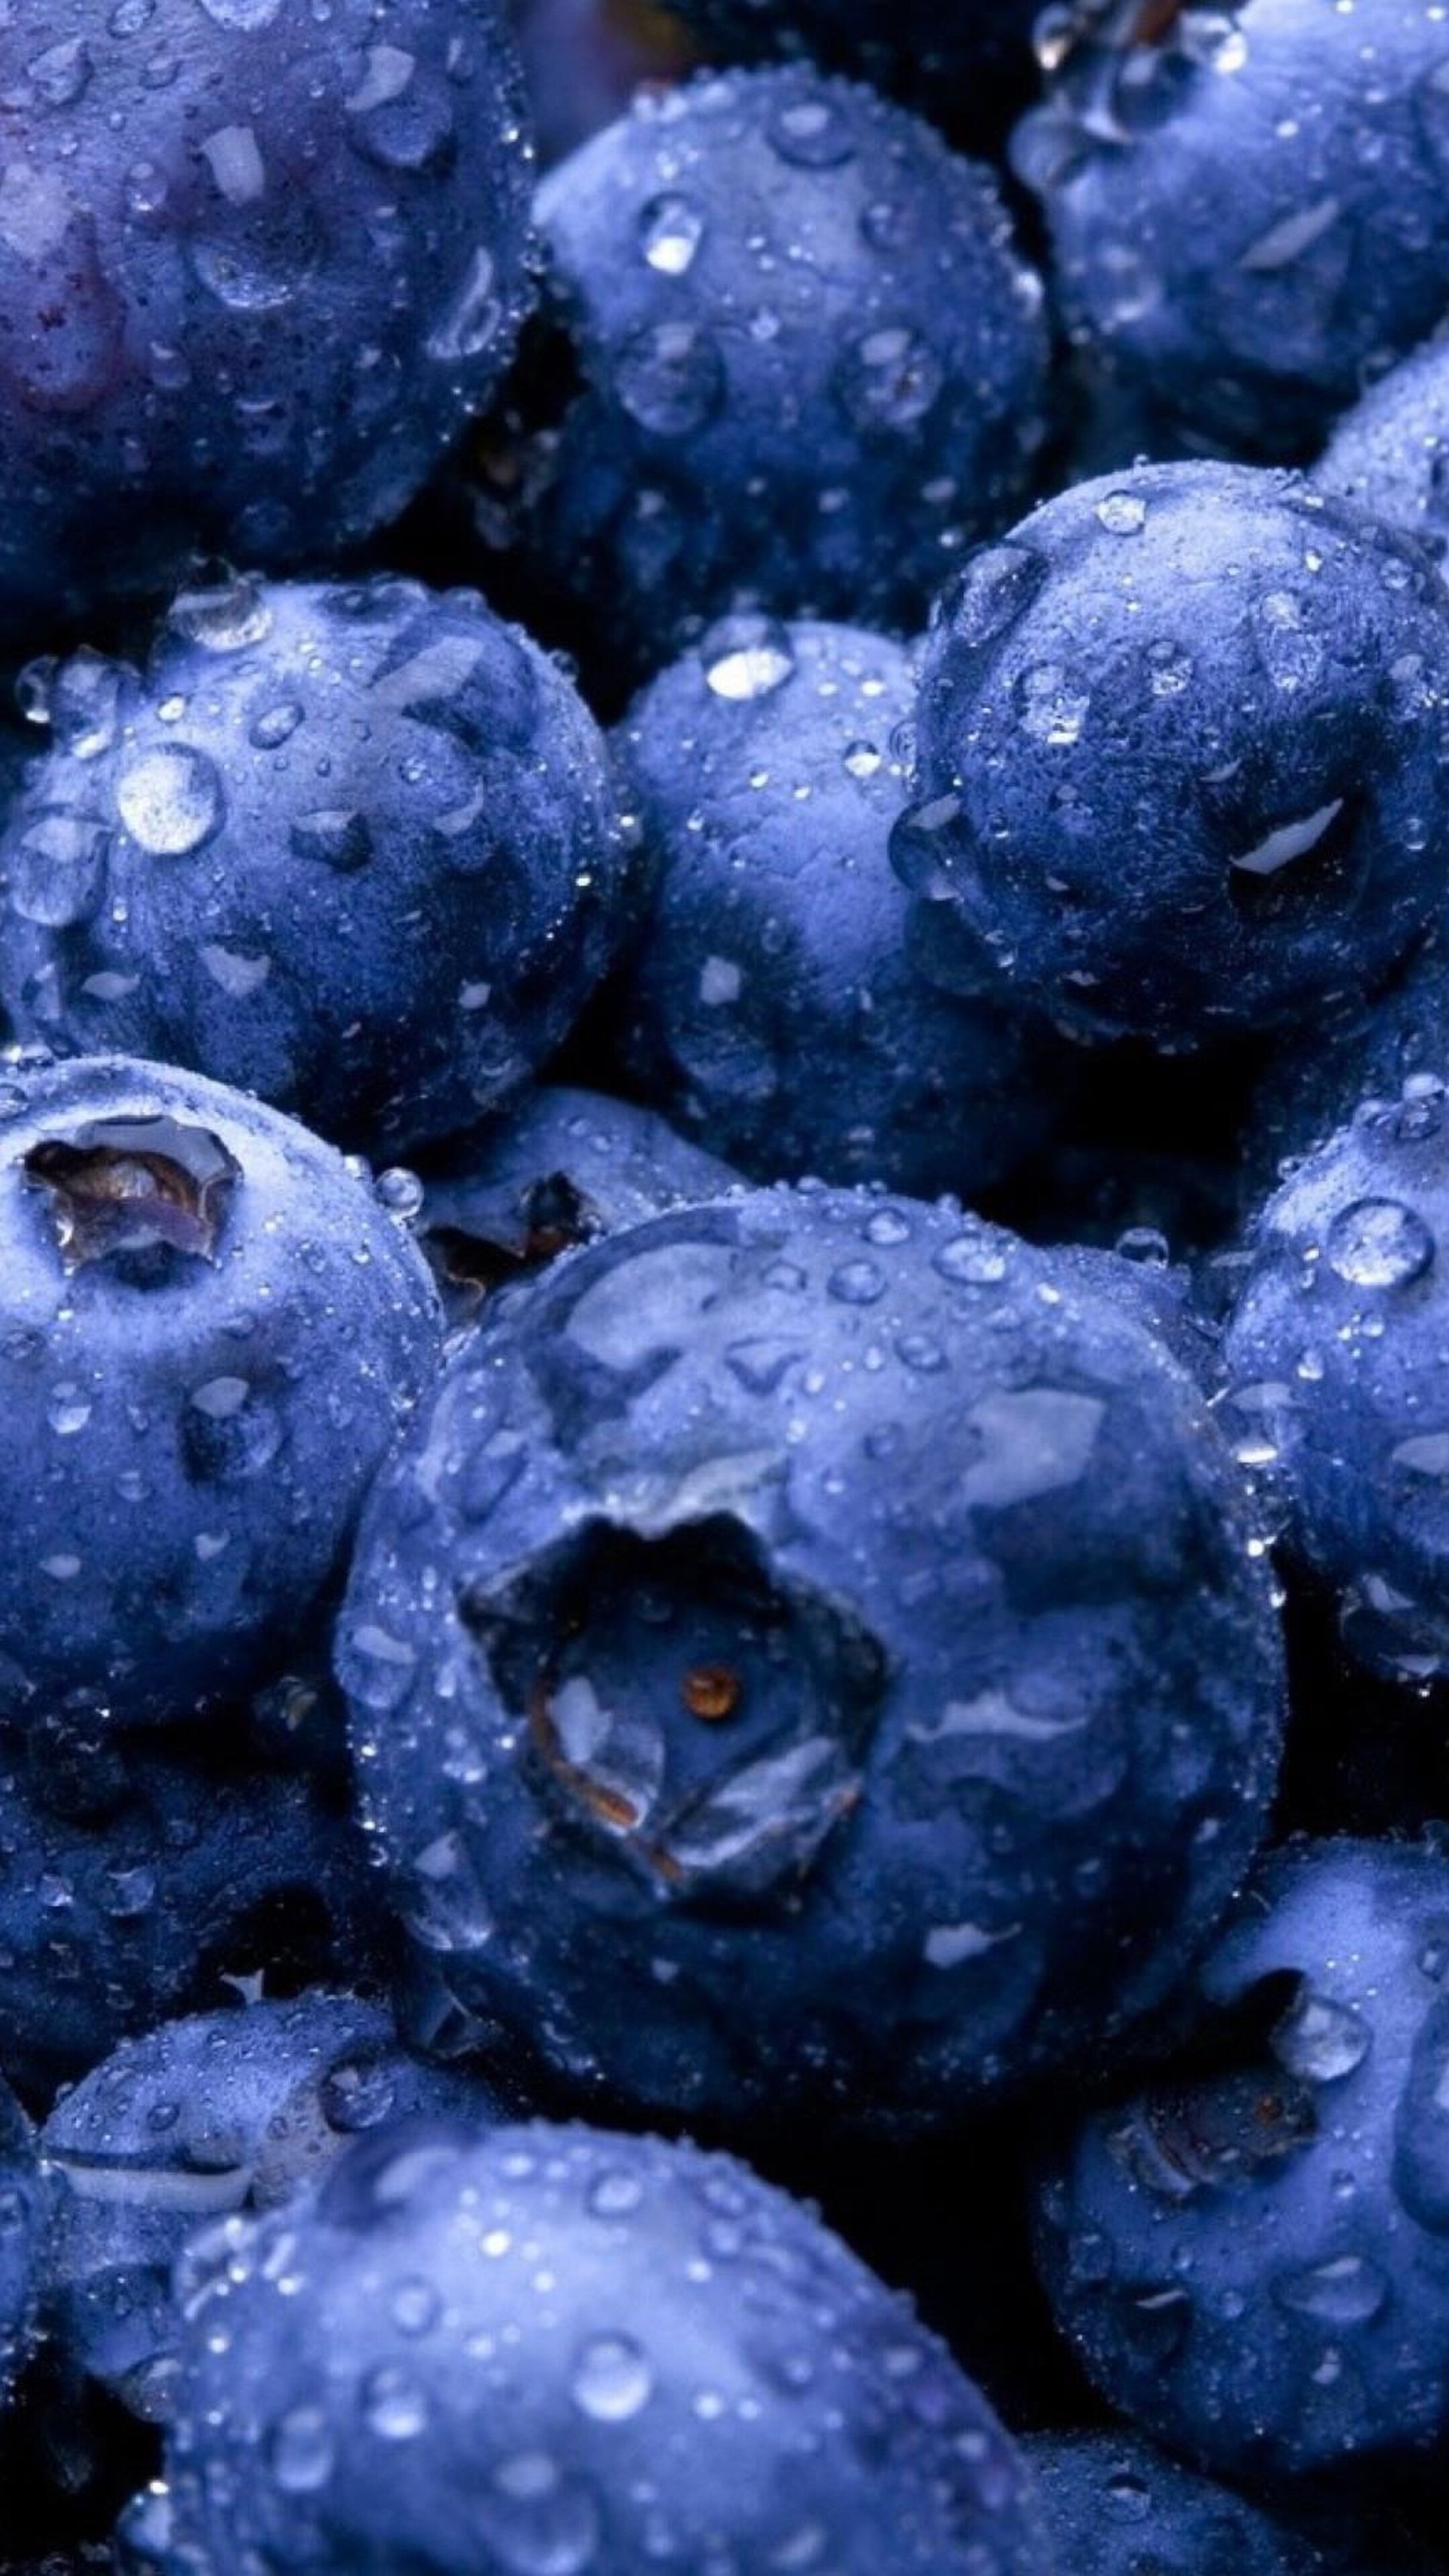 Sony Xperia blueberry wallpaper, Fruit-themed design, HD 4K image, Phone wallpaper excellence, 2160x3840 4K Phone